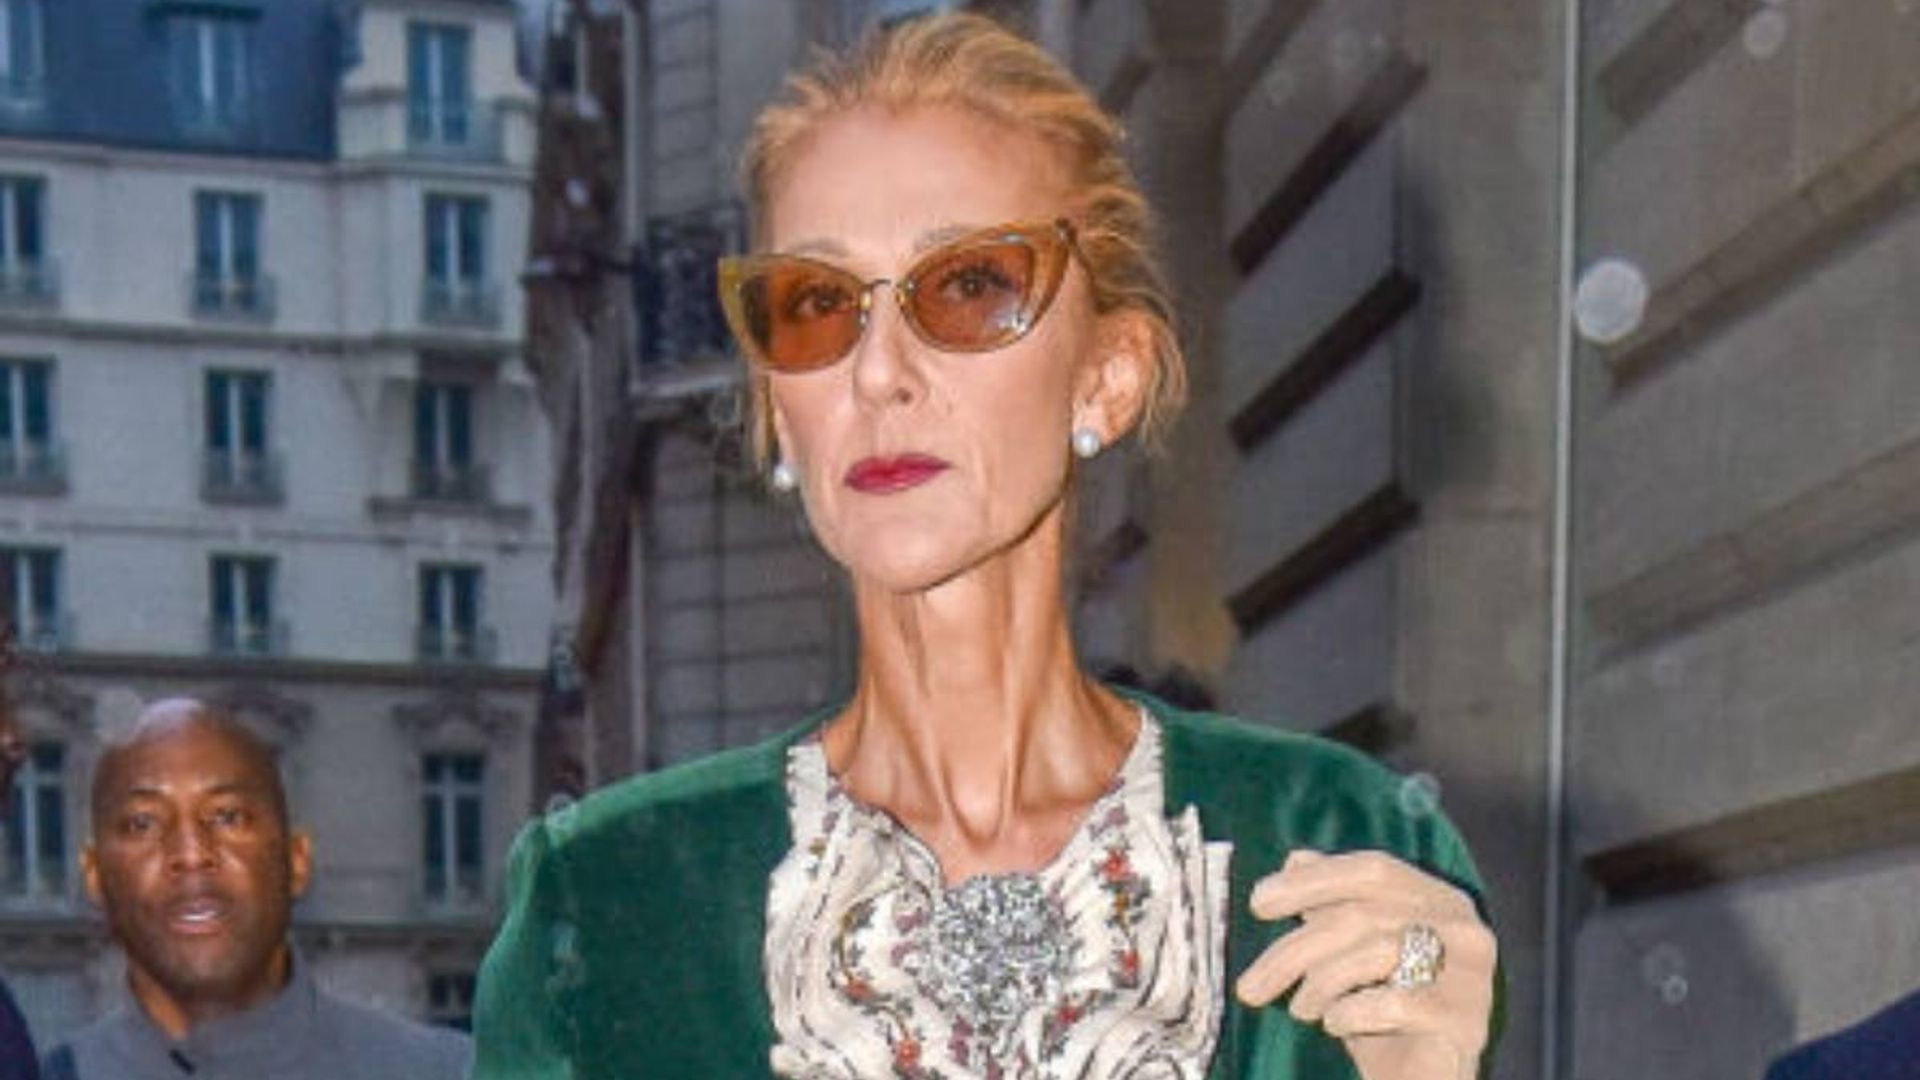 Celine Dion inundated with prayers after agonizing health update